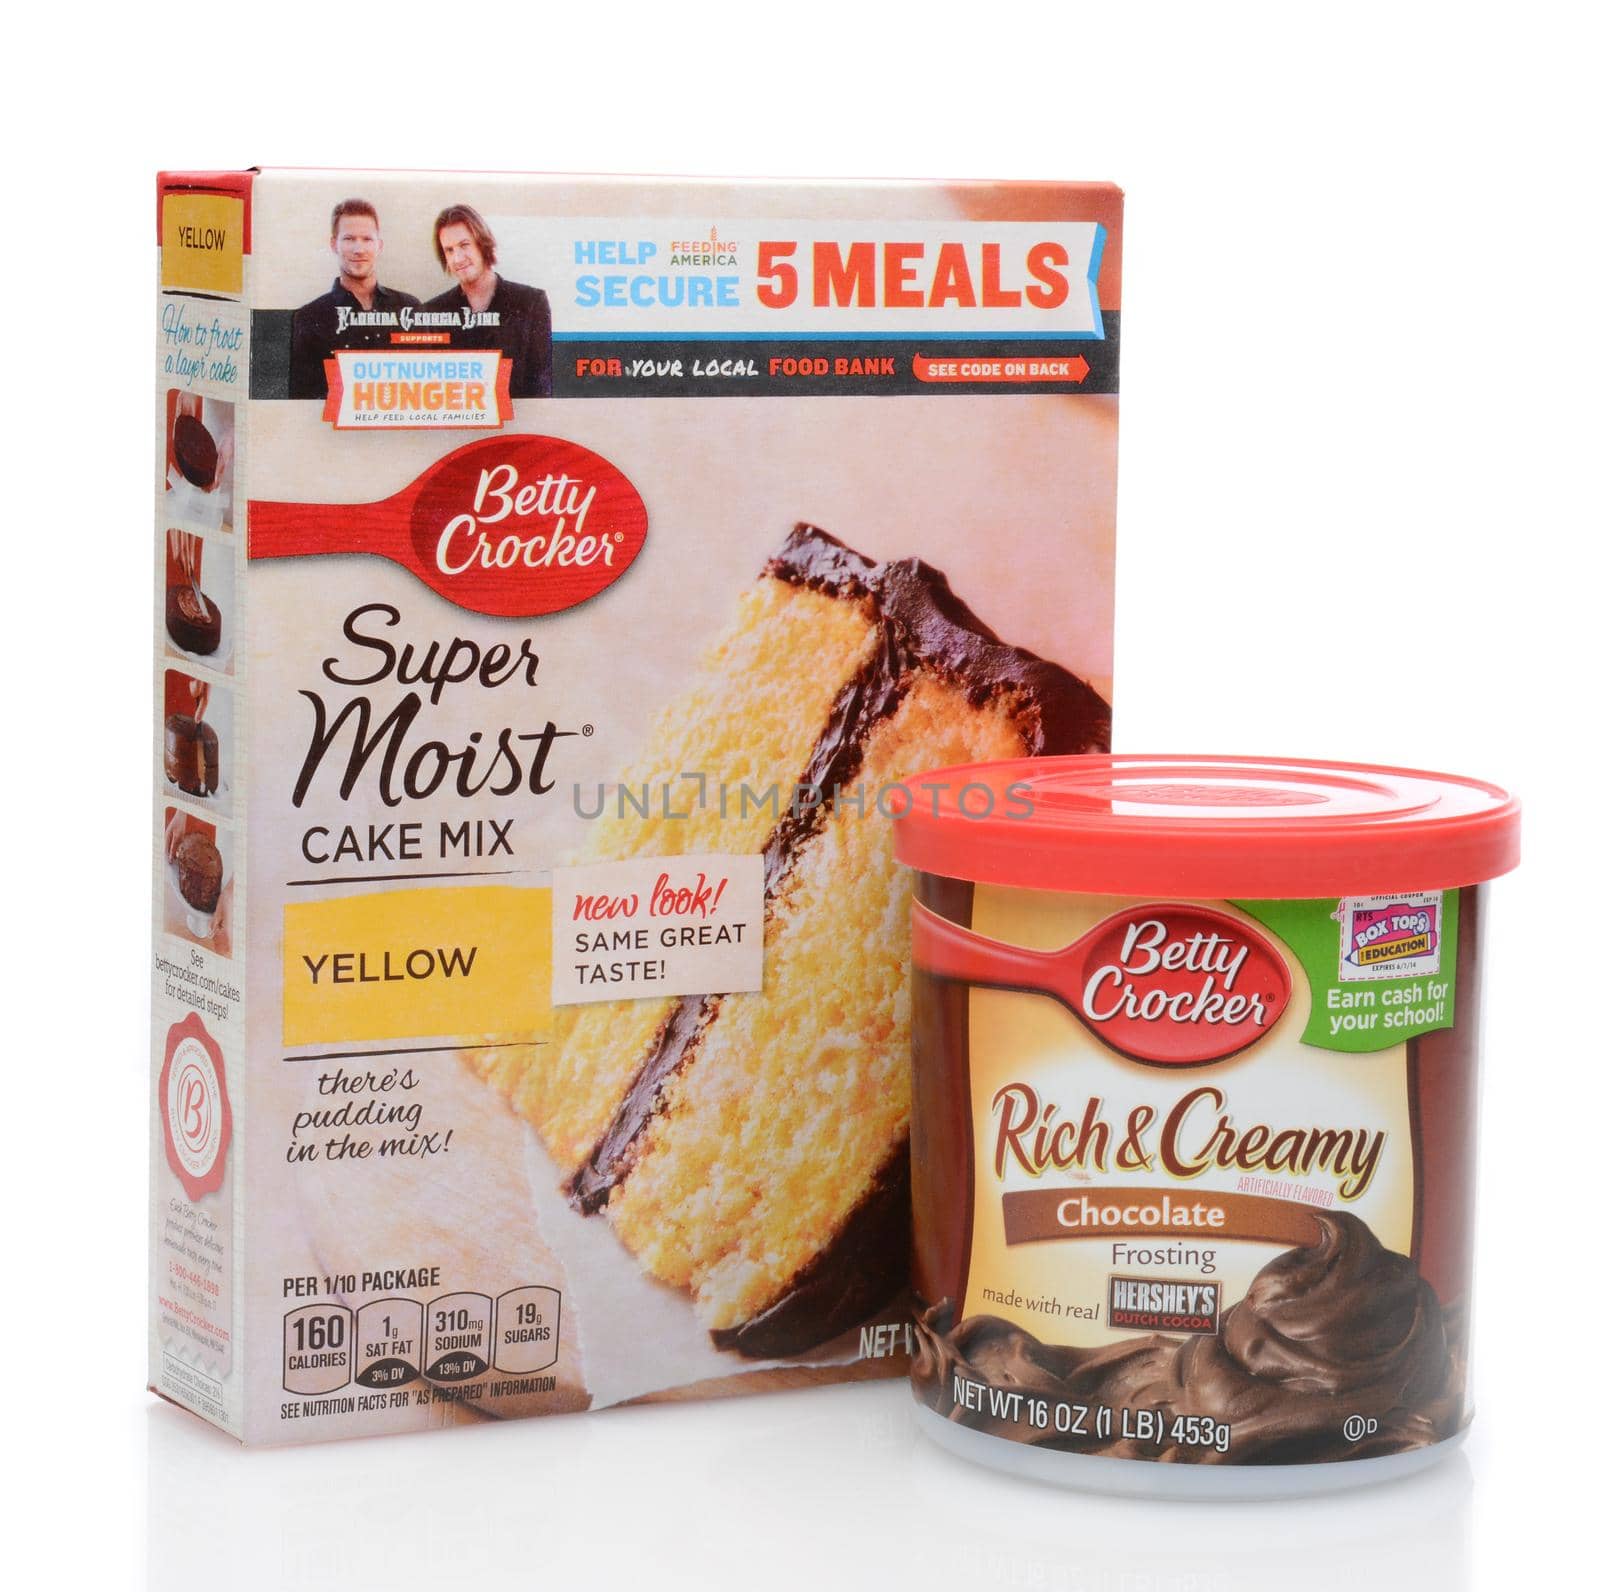 IRVINE, CA - JUNE 23, 2014: Betty Crocker Cake Mix and Frosting. Betty Crocker is a brand owned by General Mills producing a wide variety of food products.